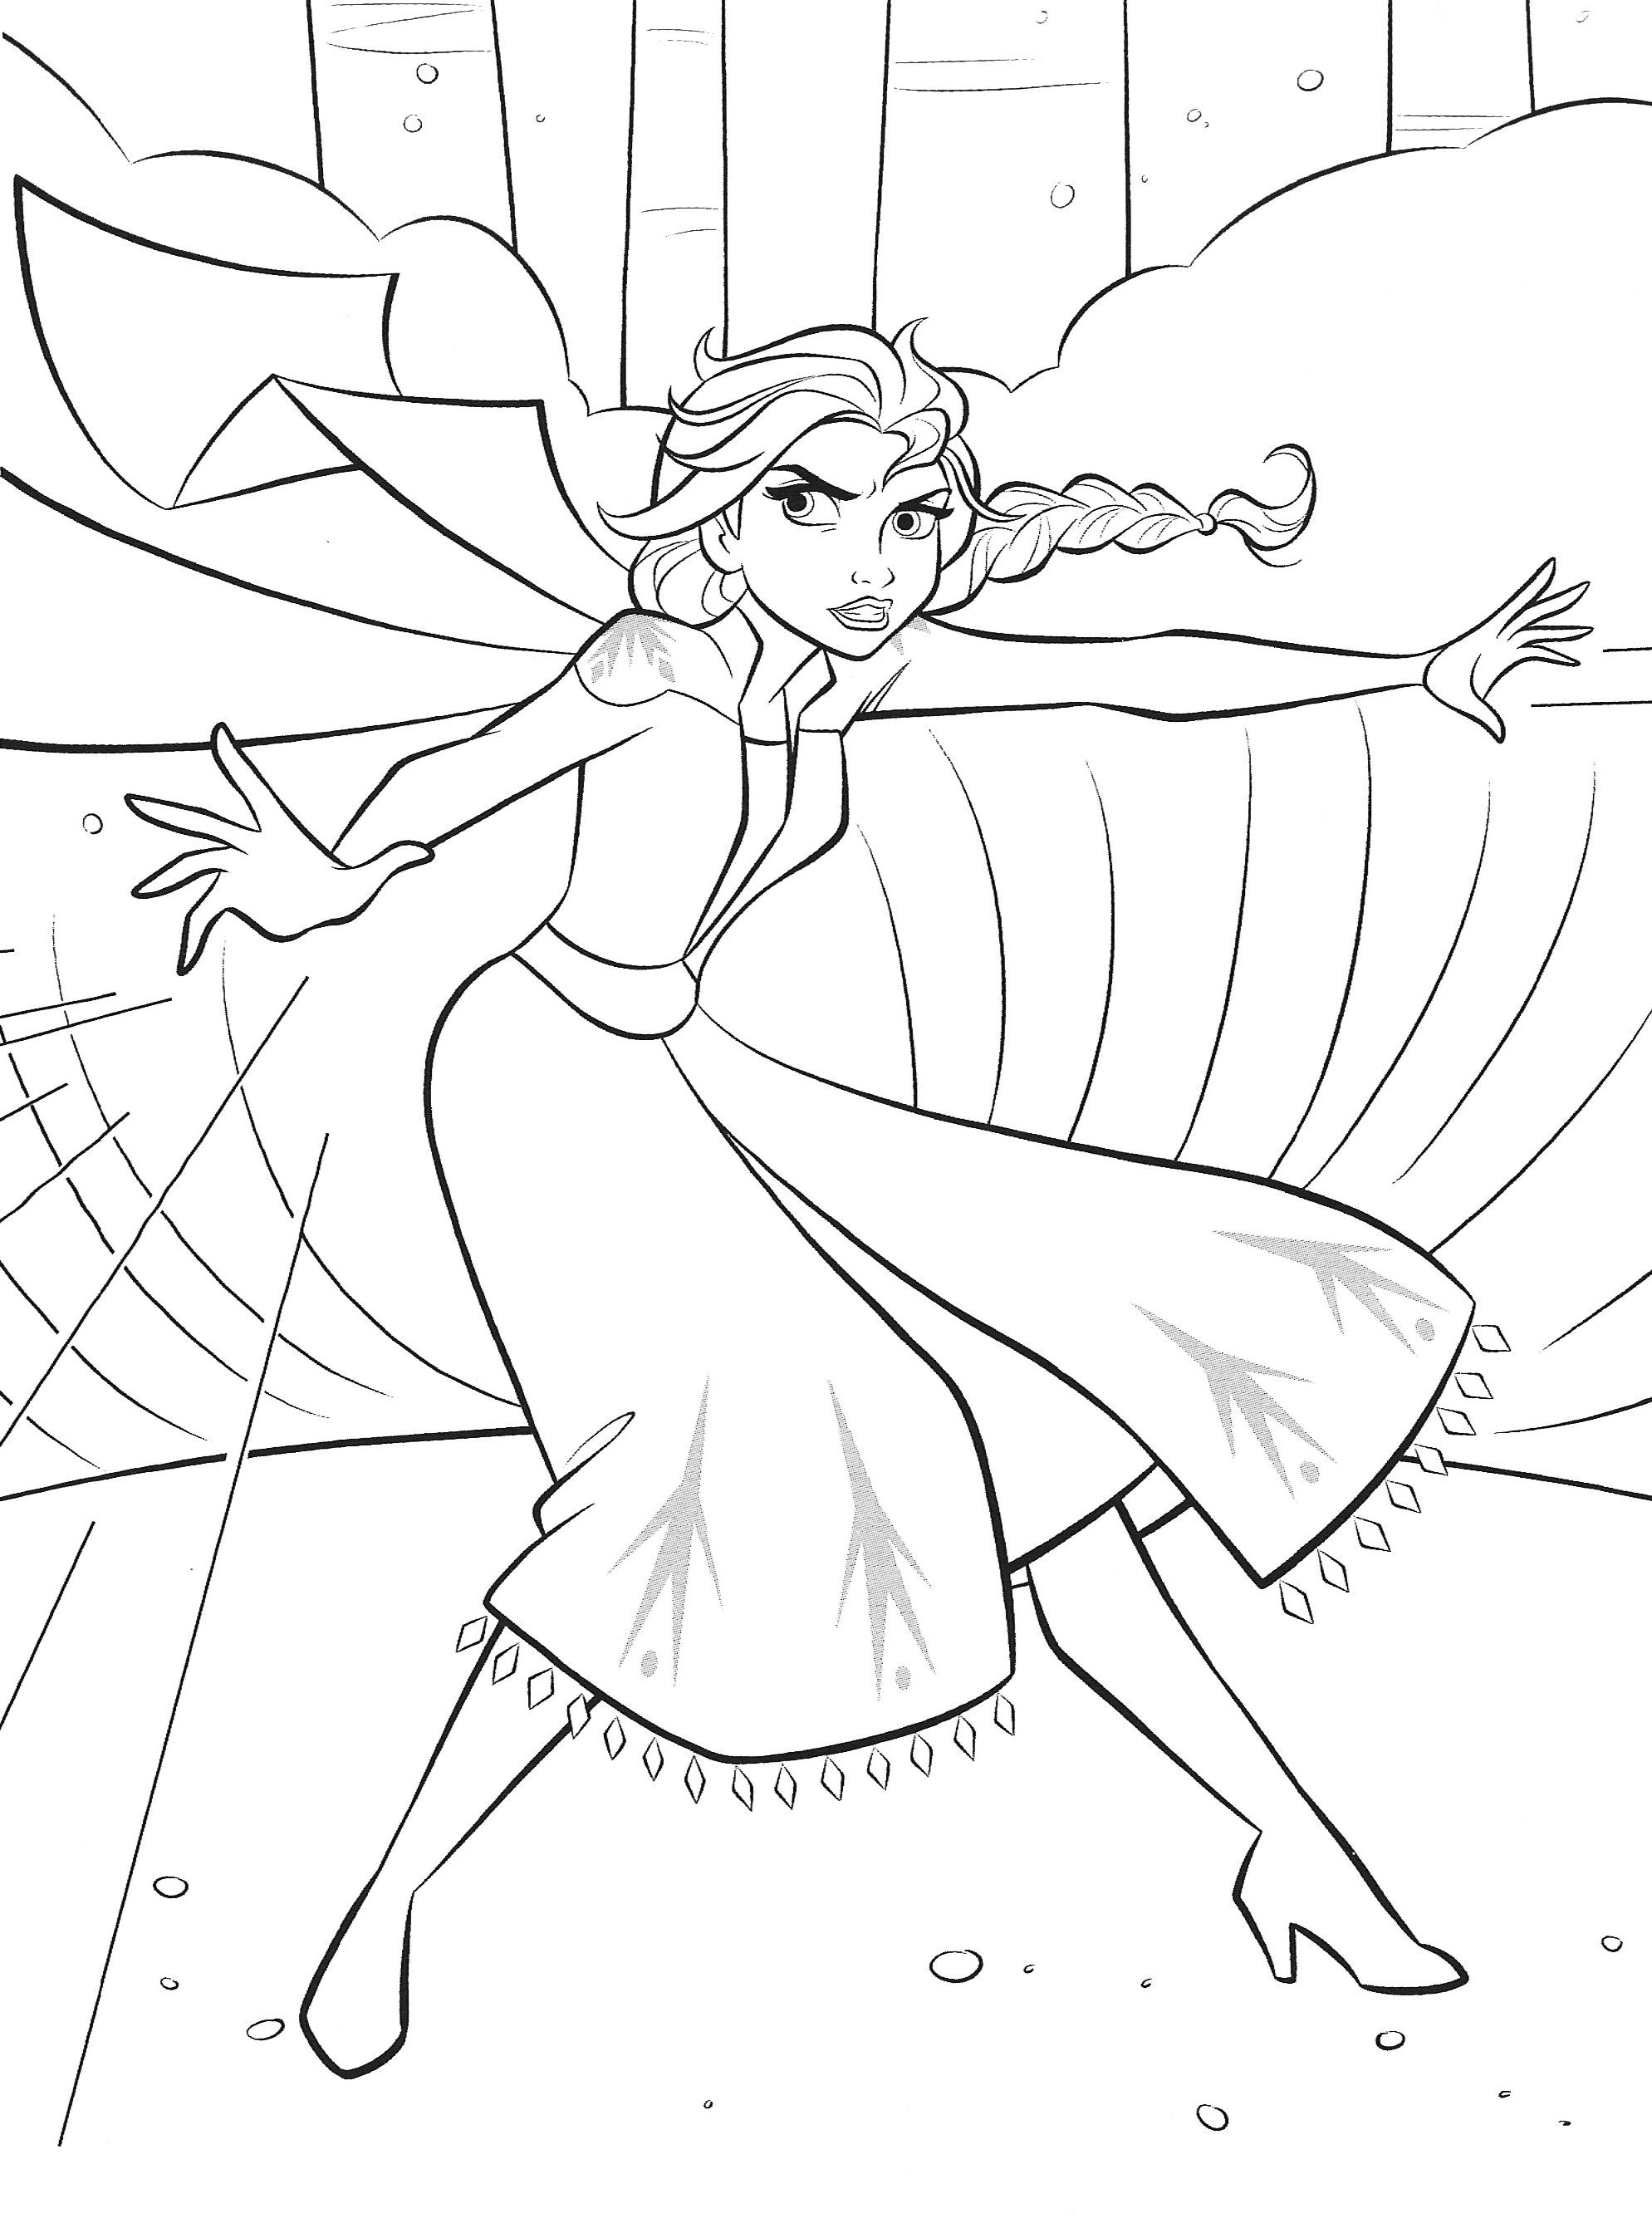 New Frozen 2 Coloring Pages With Elsa Youloveit Com